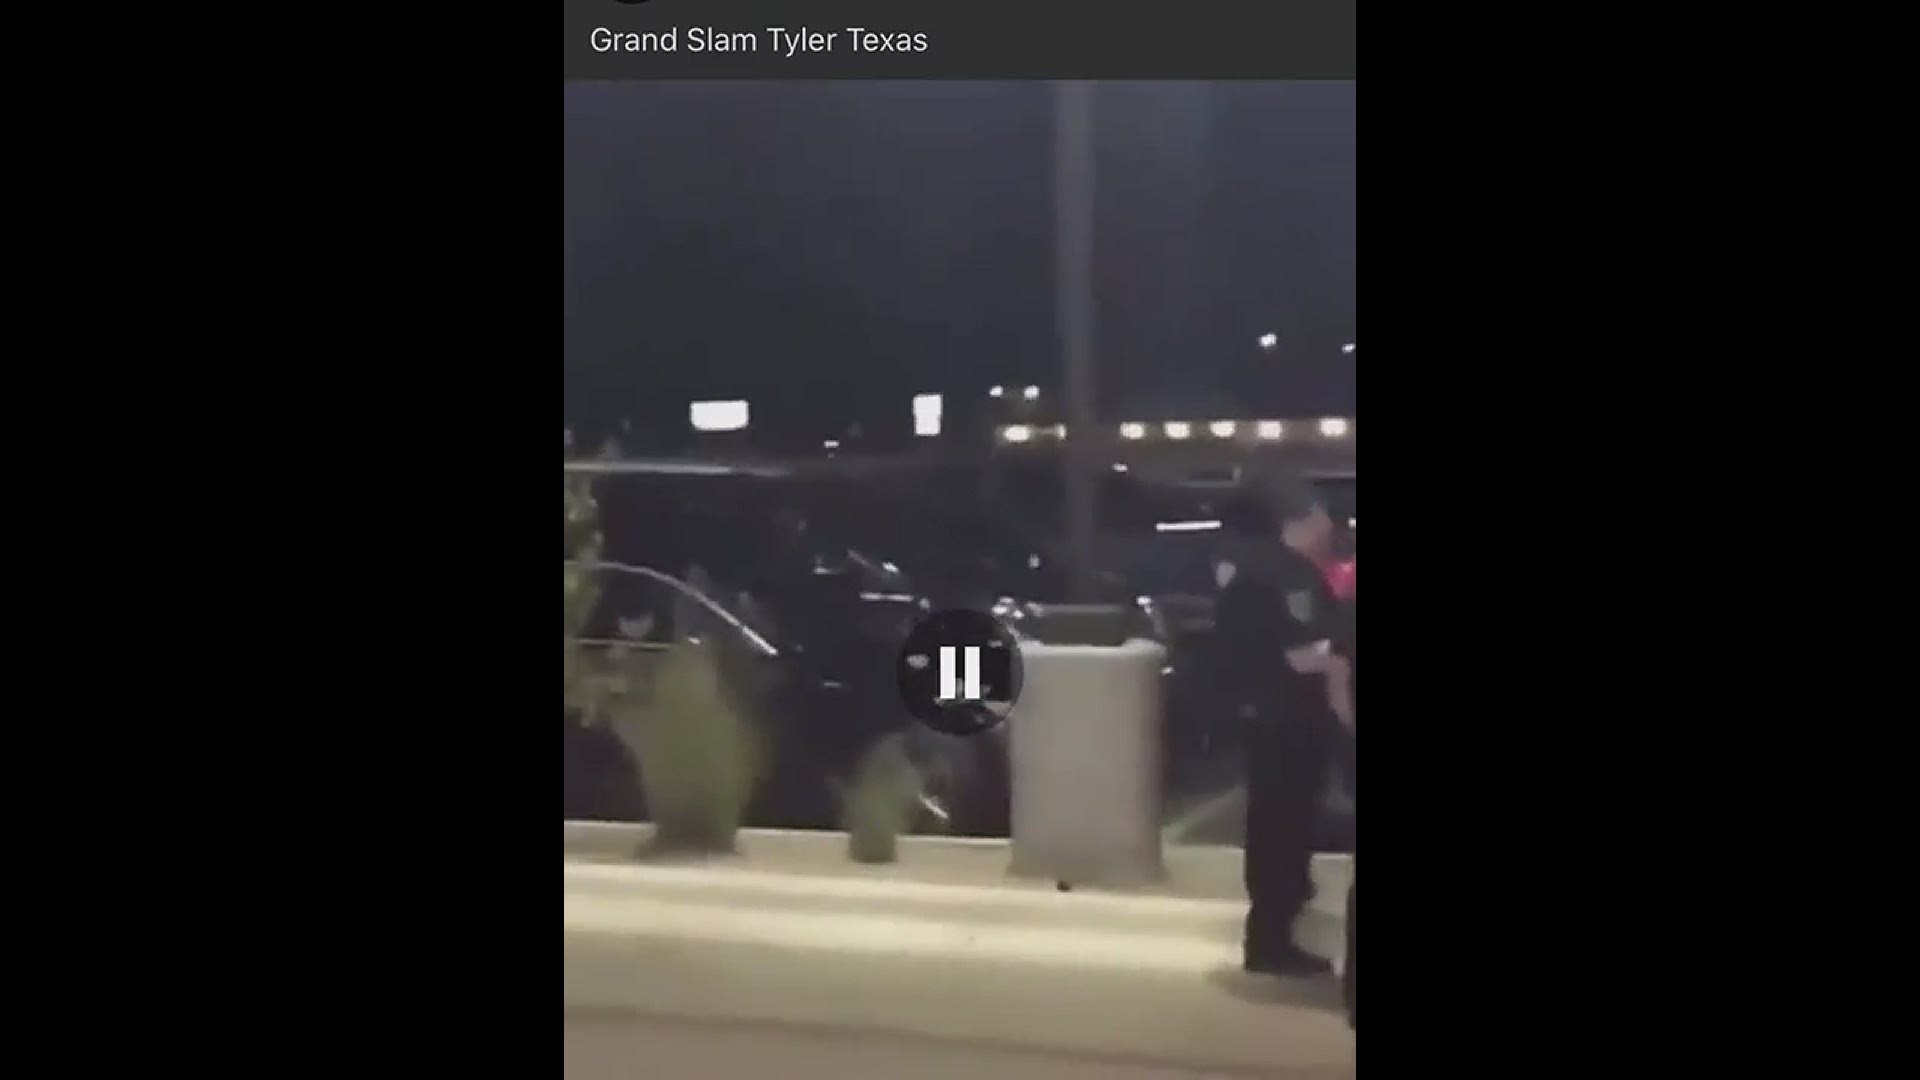 Video footage revealed off-duty Bullard police officers, who were working security at the Times Square Grand Slam in Tyler, slamming a Black teen to the ground.